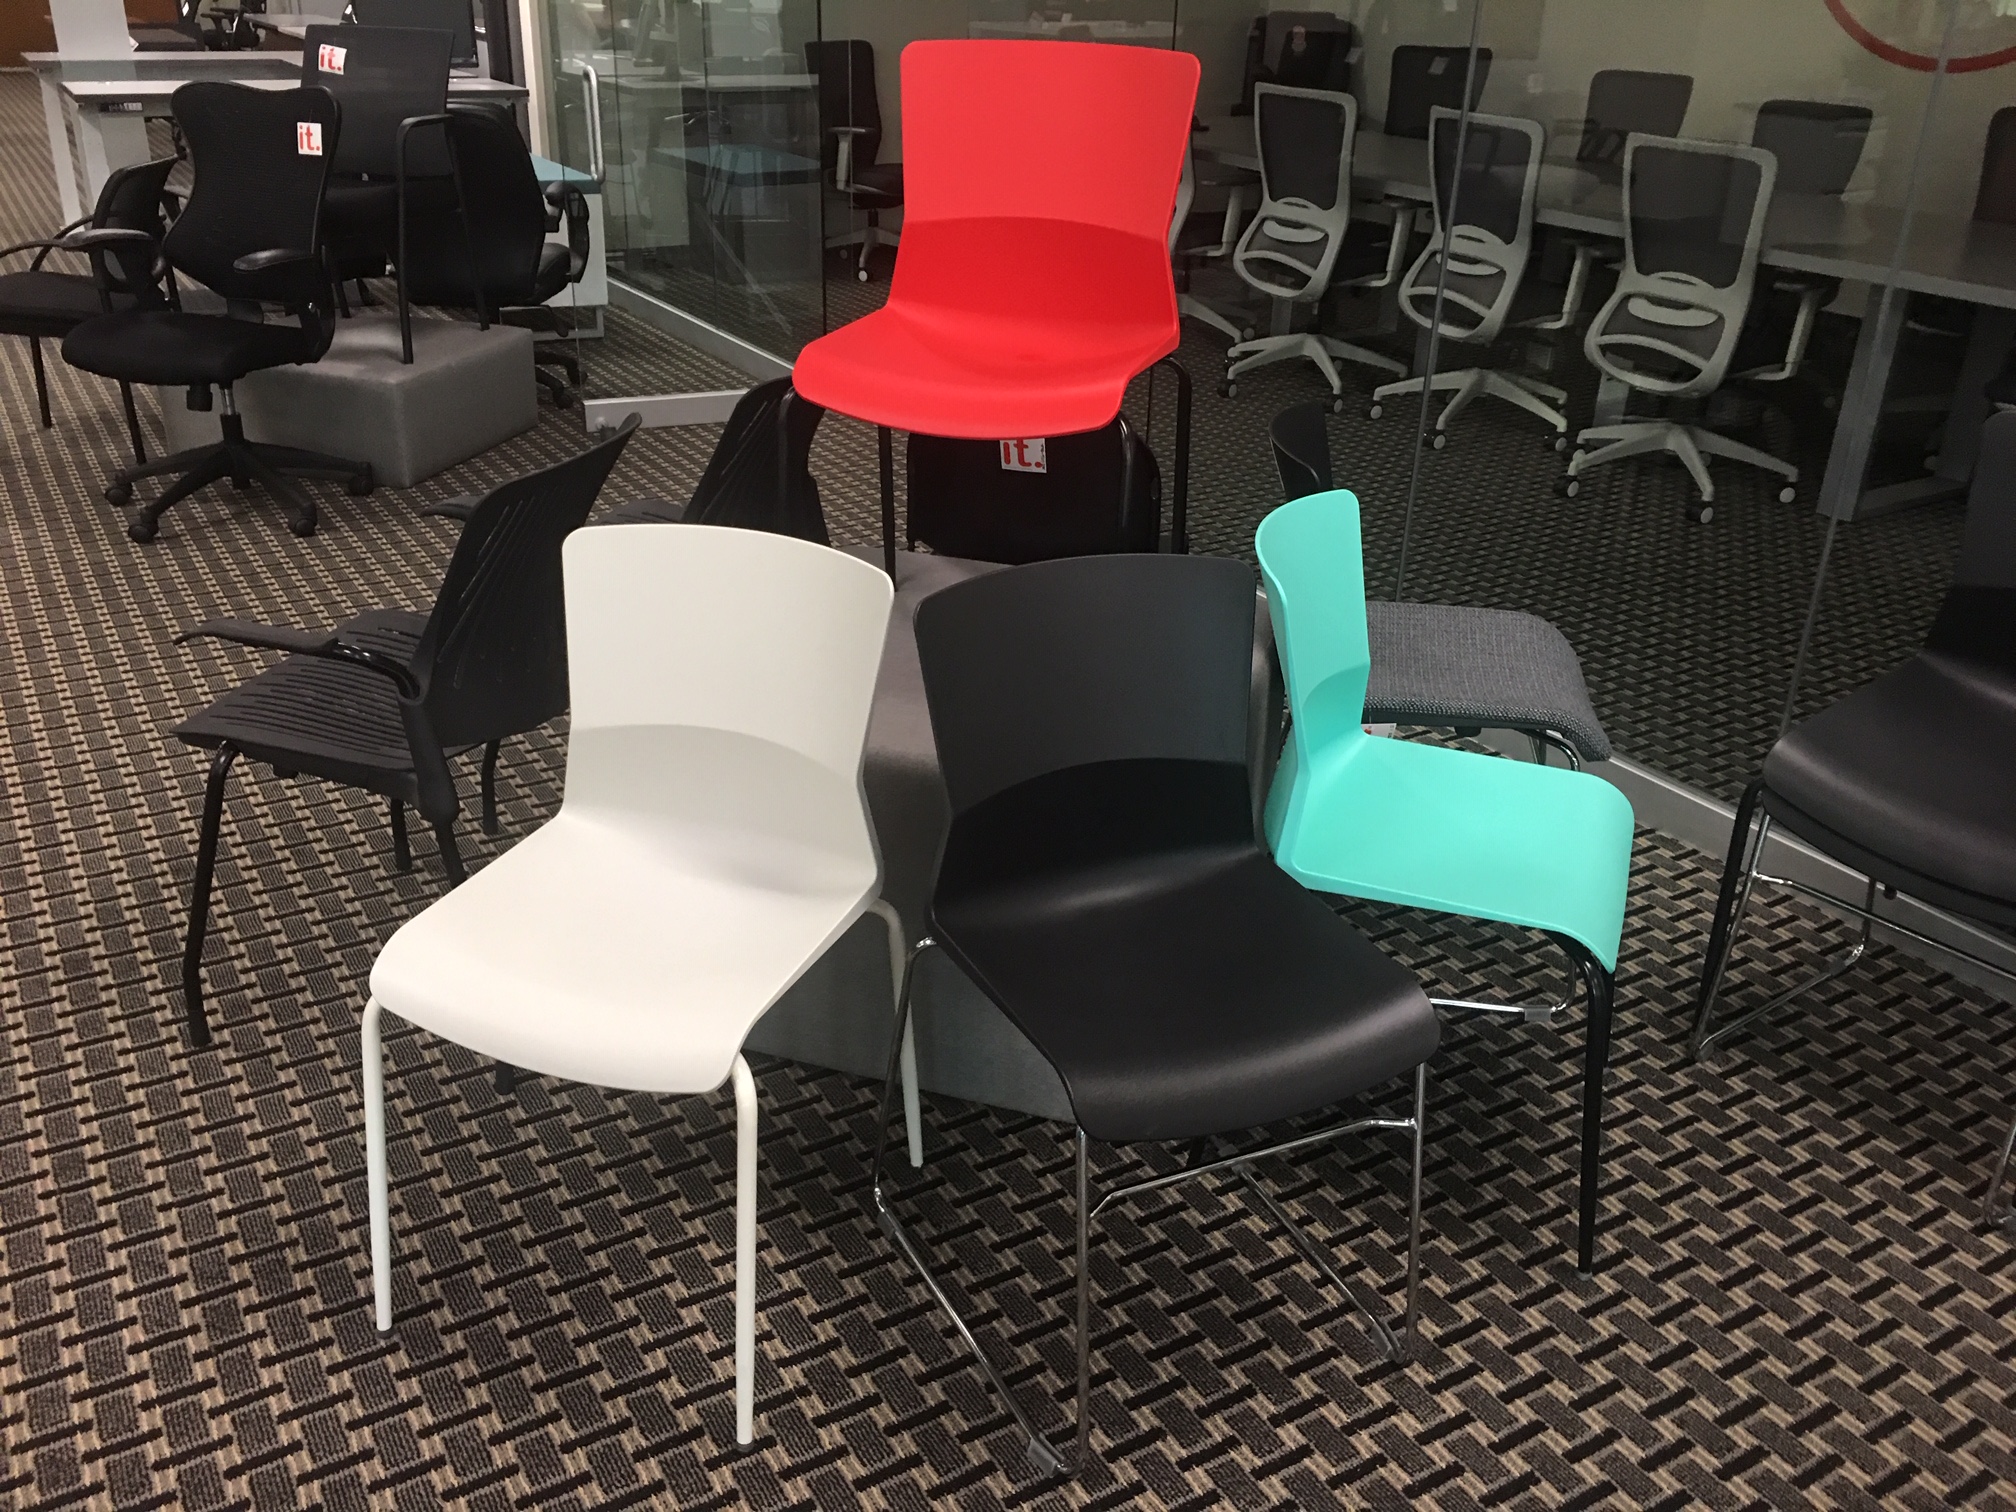 Black bar-height break room chairs at table